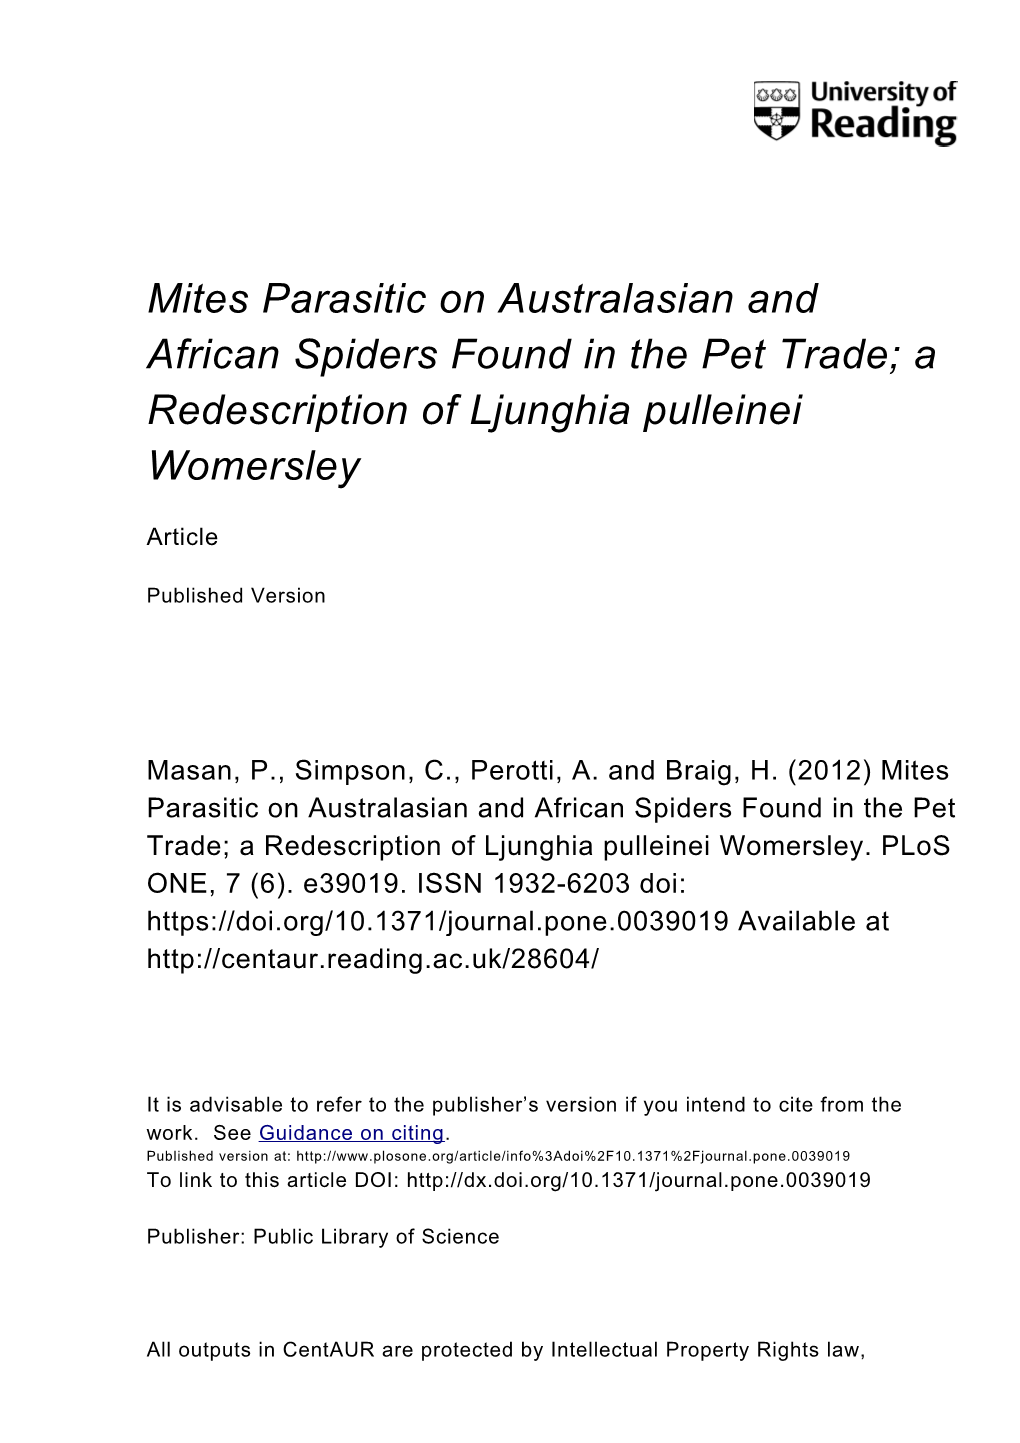 Mites Parasitic on Australasian and African Spiders Found in the Pet Trade; a Redescription of Ljunghia Pulleinei Womersley